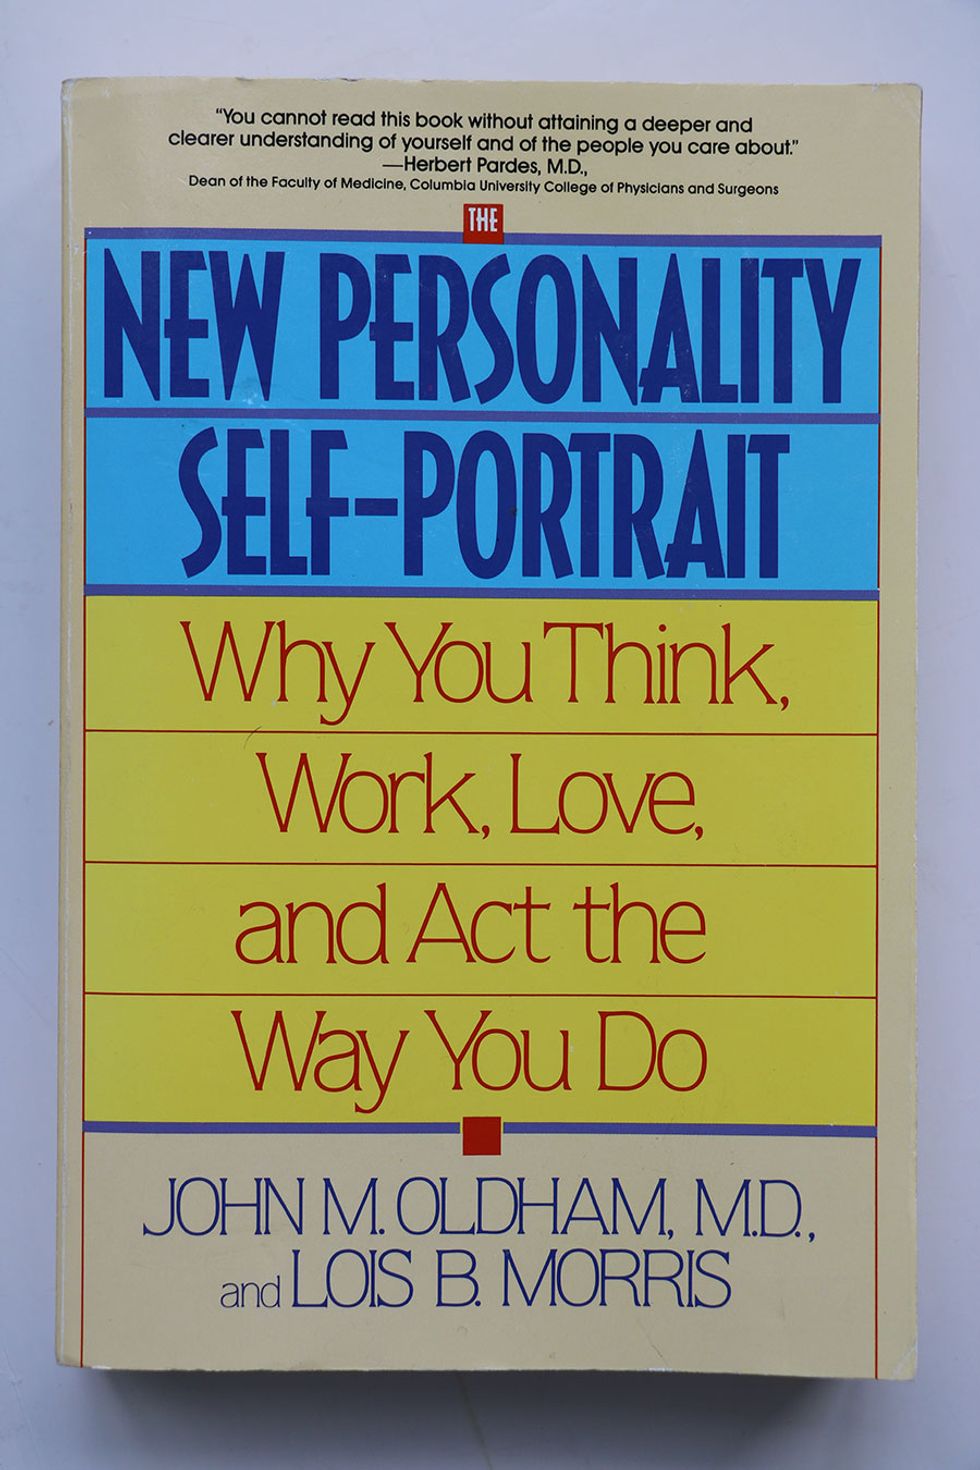 A Short Book Review: The New Personality Self-Portrait